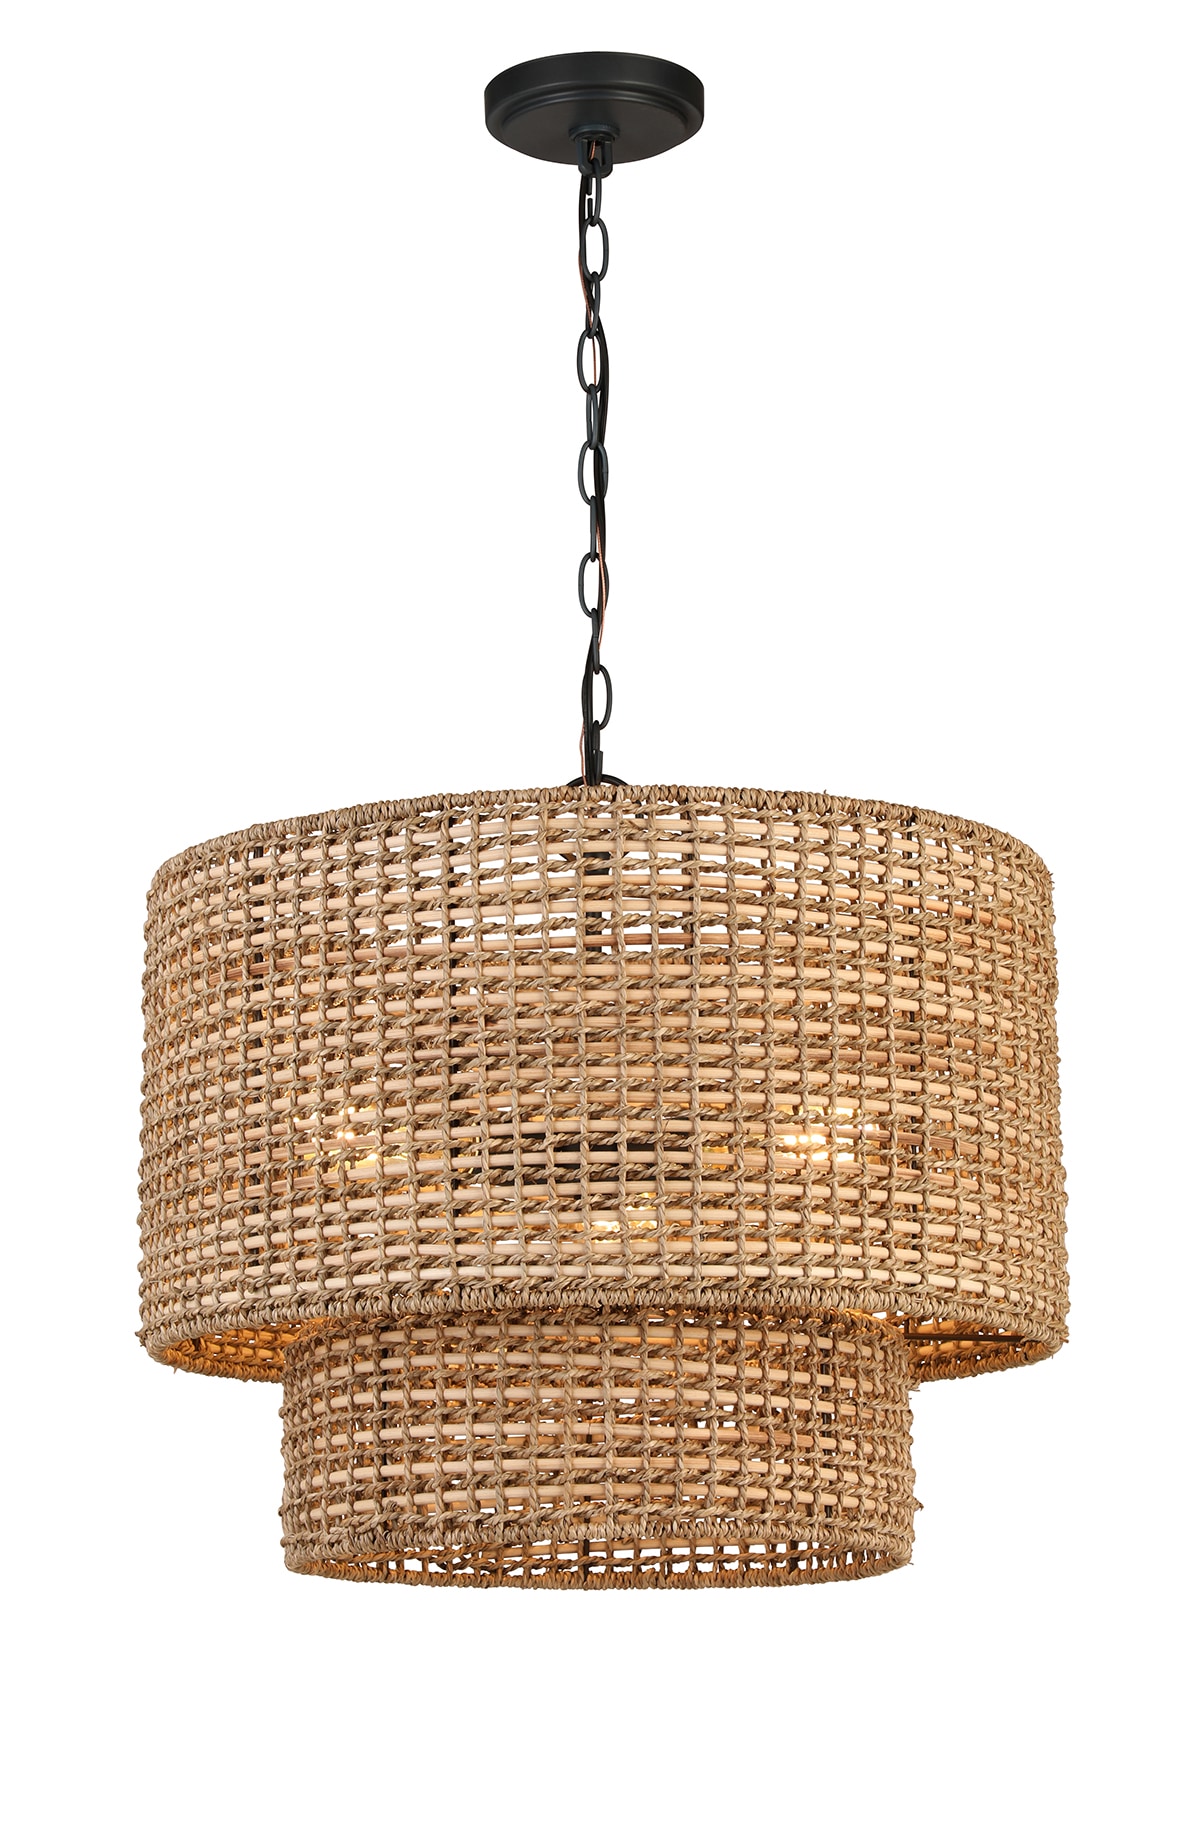 Iron Gold Lamp Shade Chandelier Shade Ceiling Light Cage Pendant Shade 4 